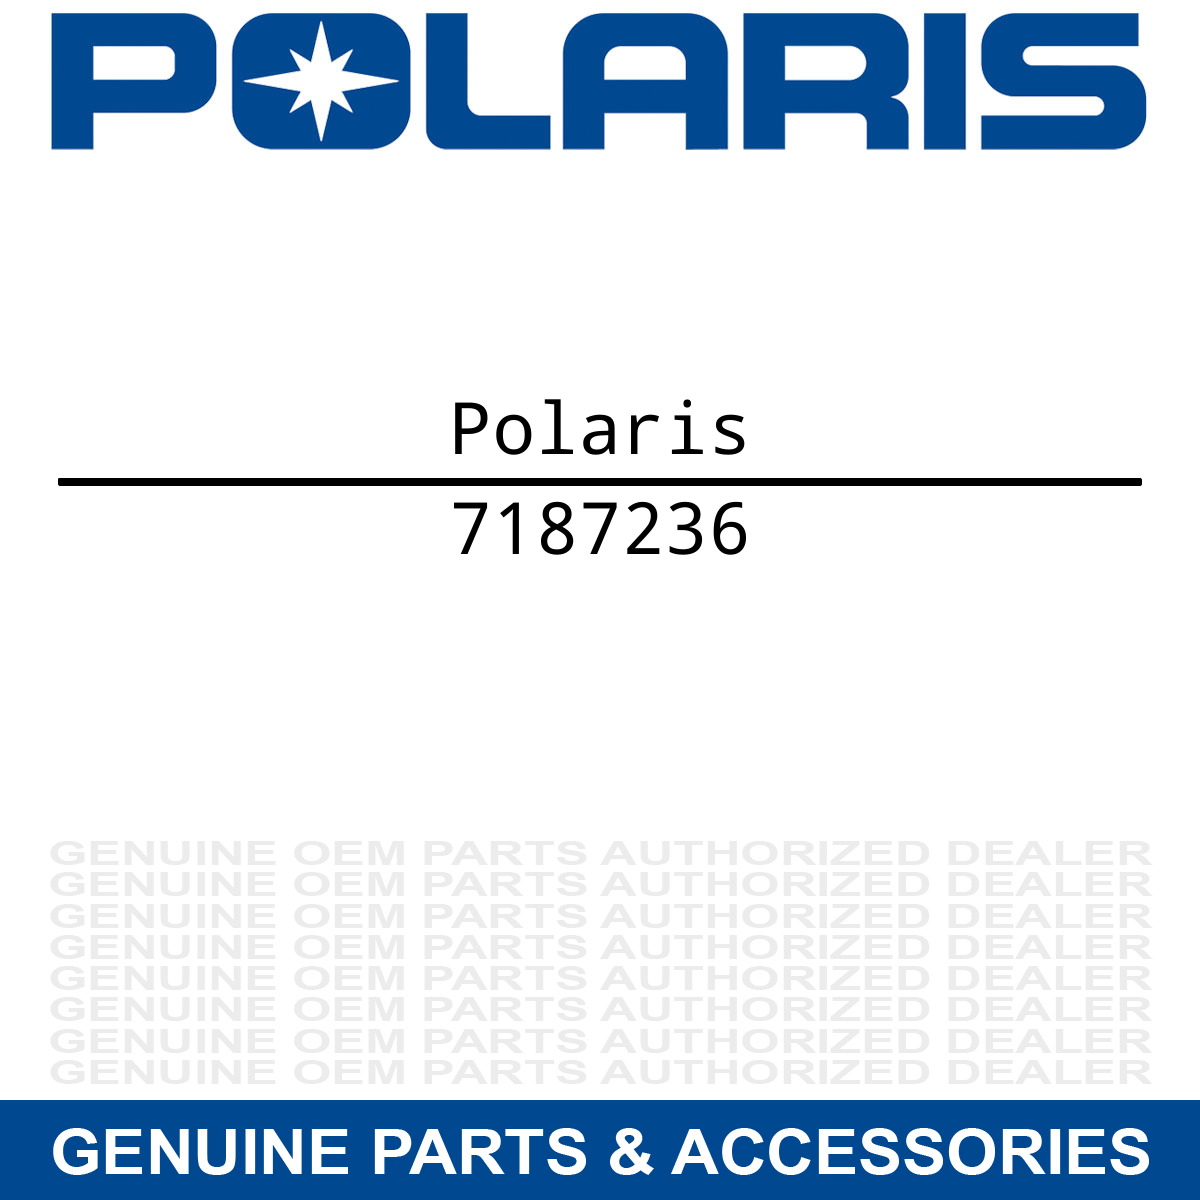 Polaris 7187236 Left Hand "120 LE" Tunnel Side Decal